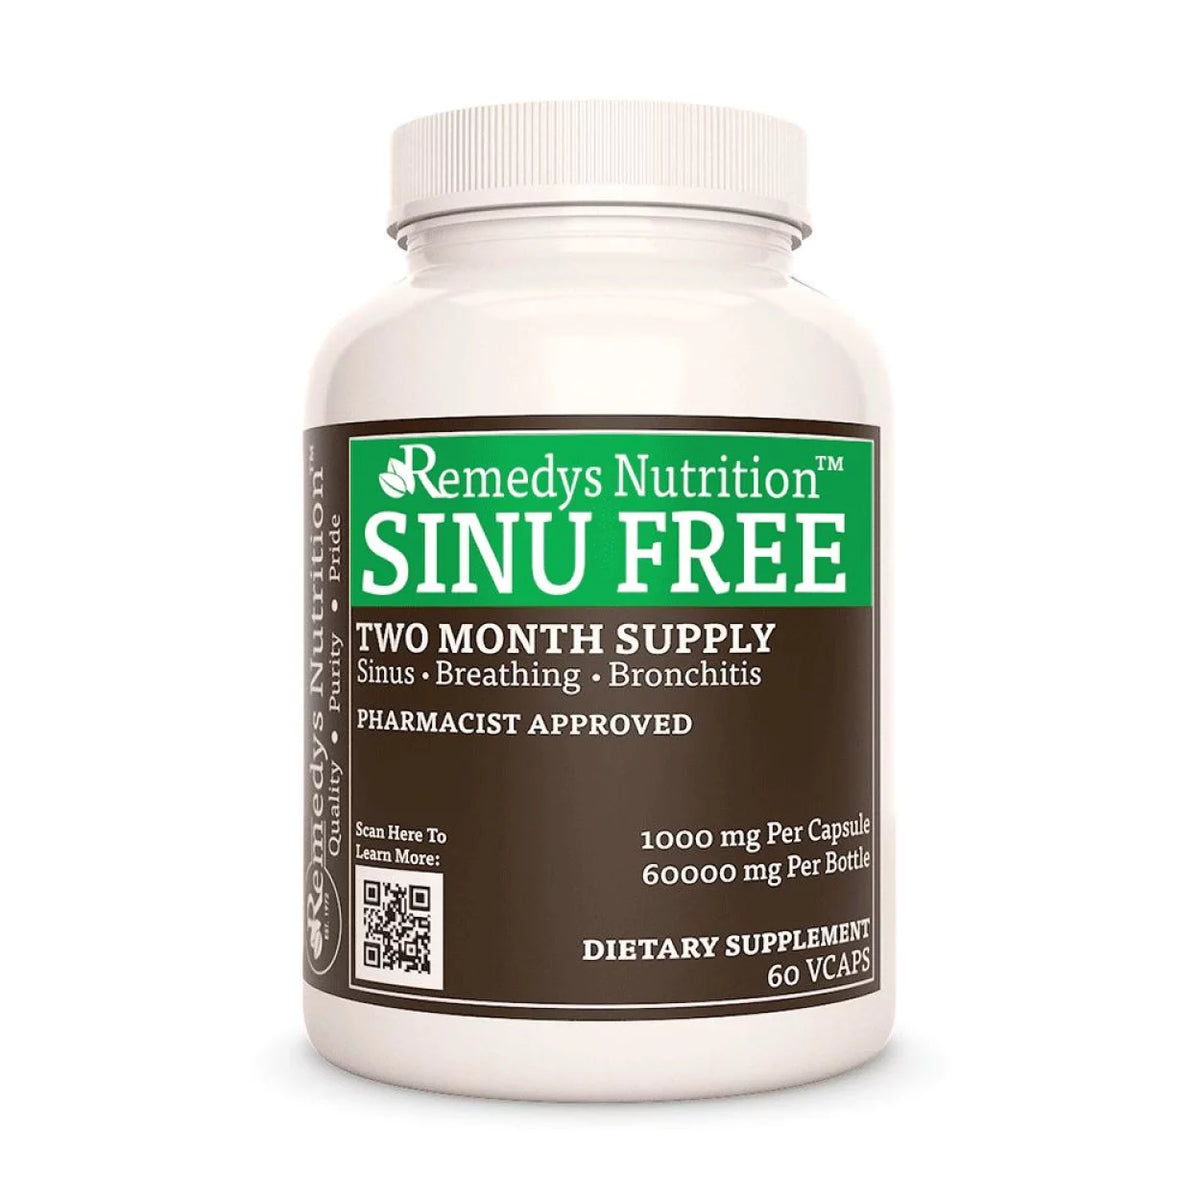 Image of Remedy's Nutrition® Sinu Free™ Capsules Herbal Dietary Supplement bottle. Made in USA Horseradish Garlic & Fenugreek